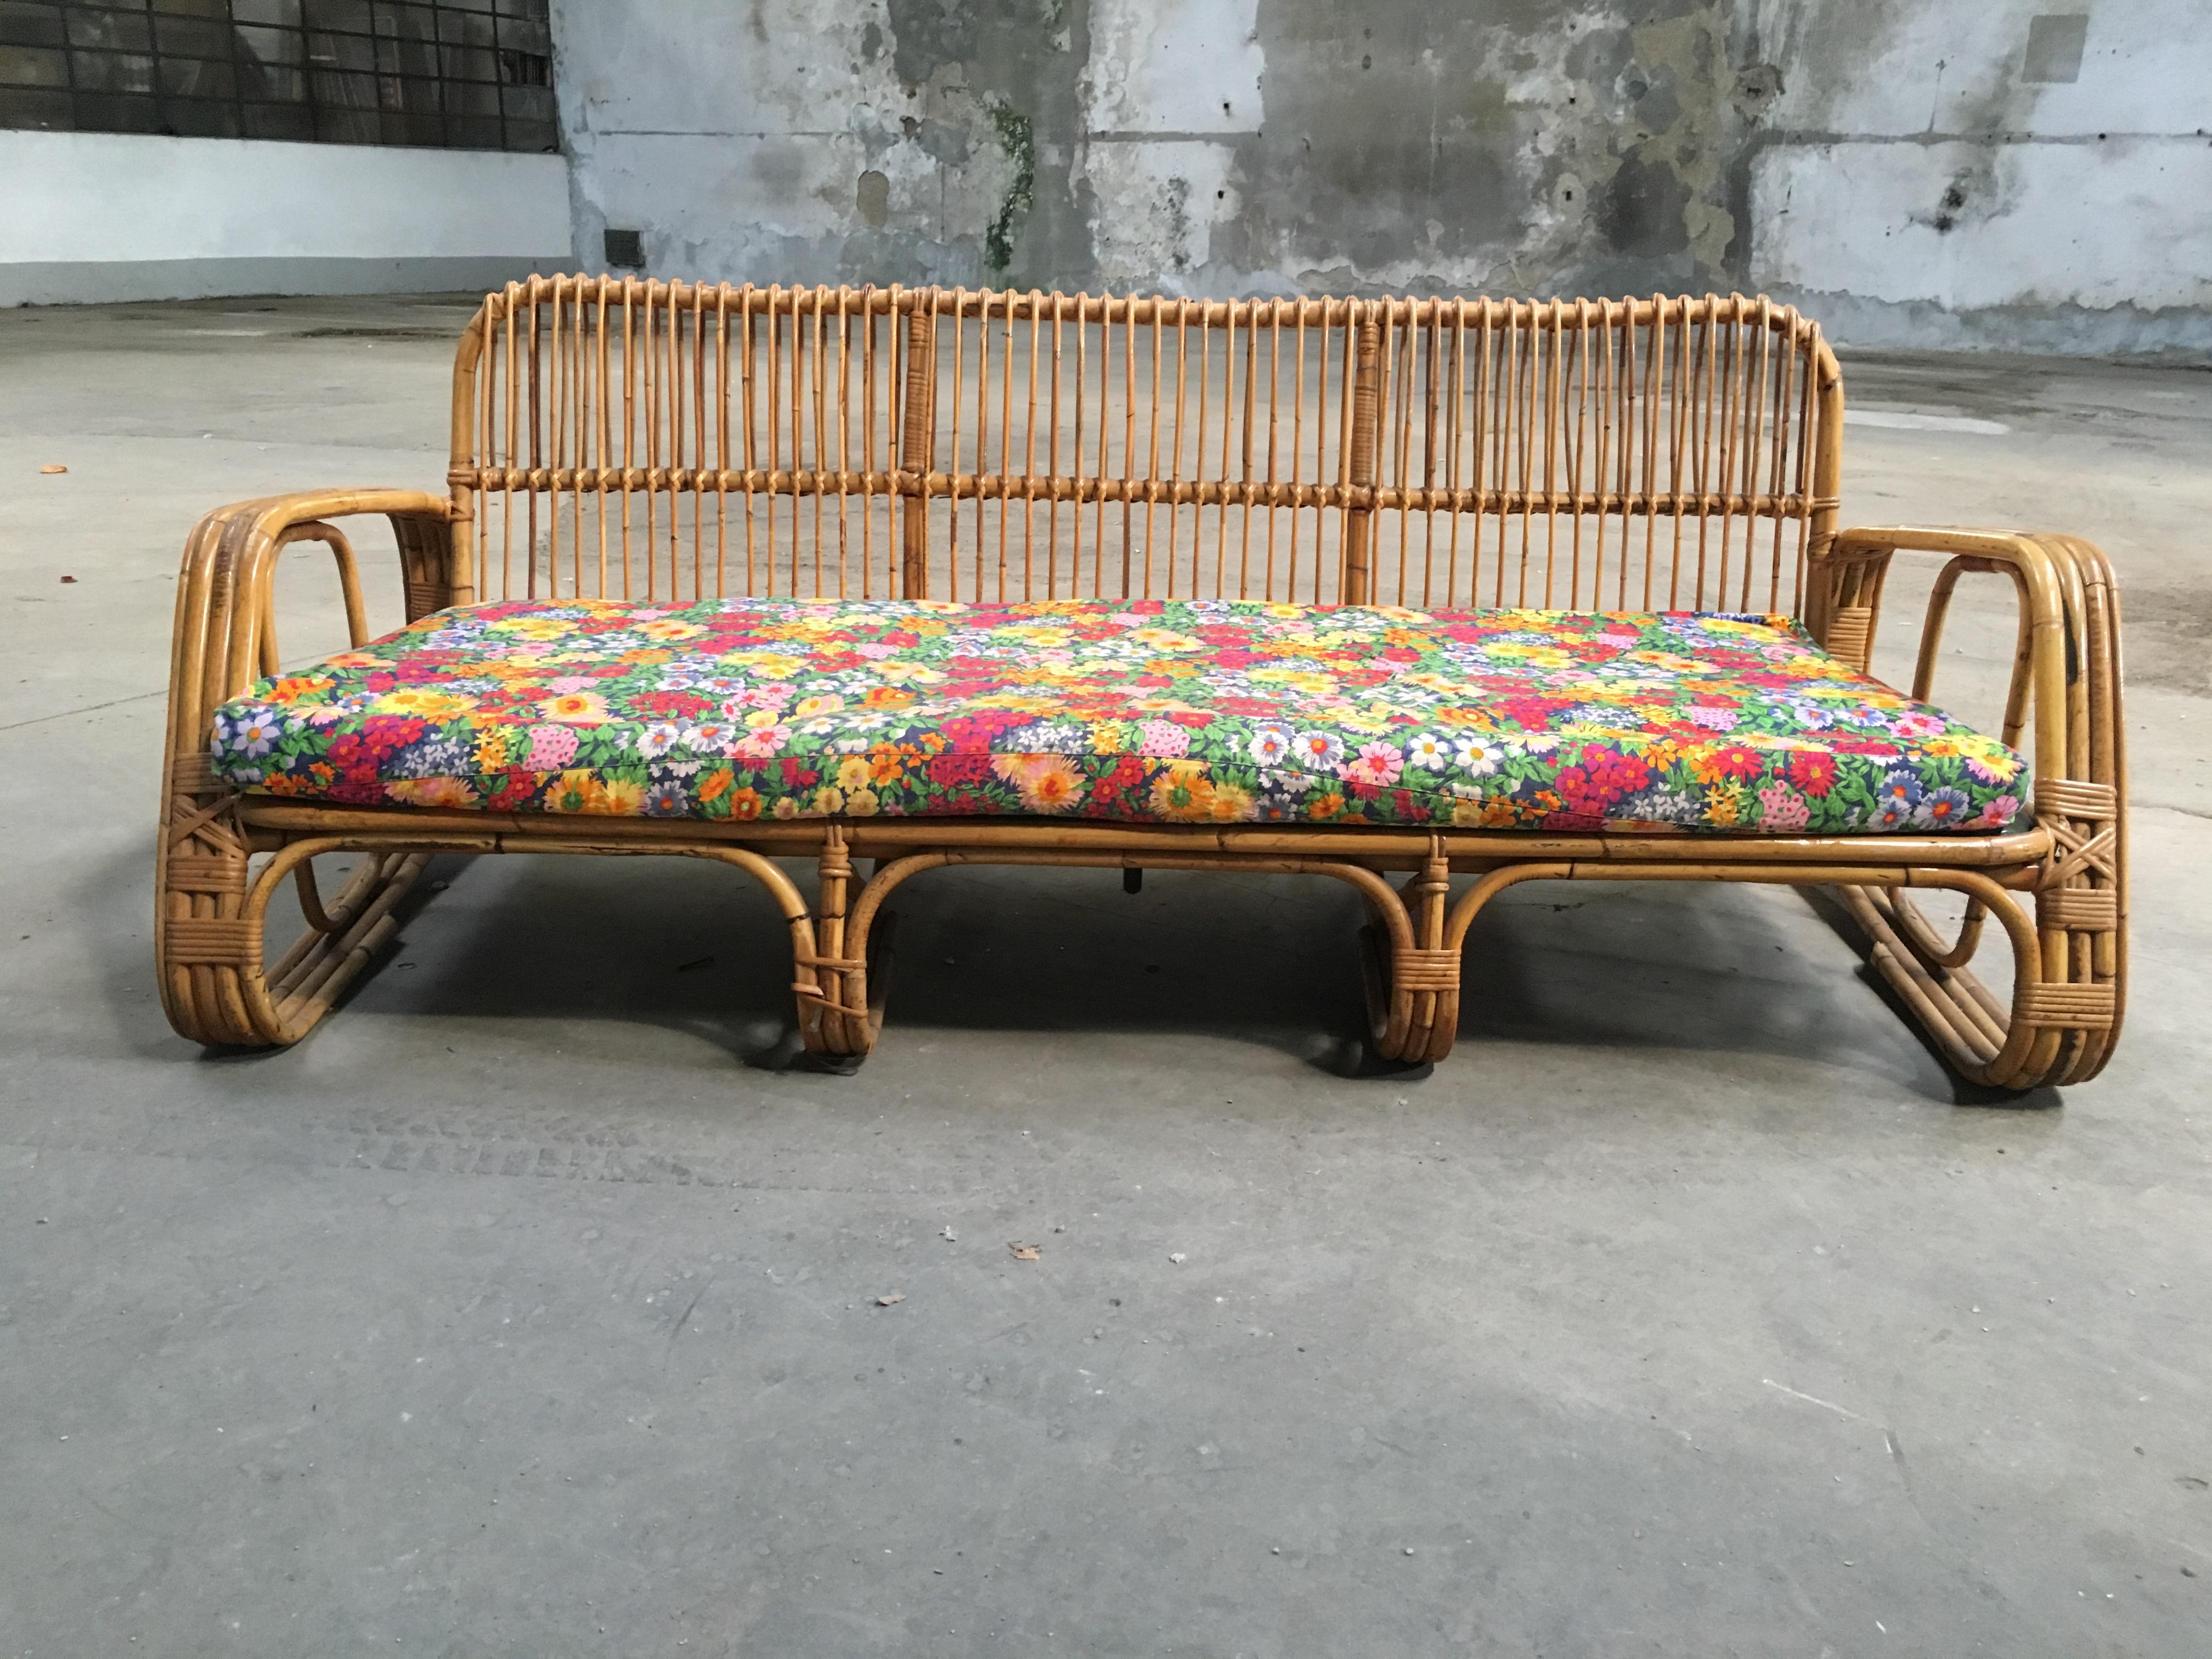 Mid-Century Modern Italian three-seat bamboo sofa with original floral cushions from 1960s.
This sofa could be sold together with the pair of bamboo armchairs visible in the pictures.
The sofa could also become a couple with another identical sofa